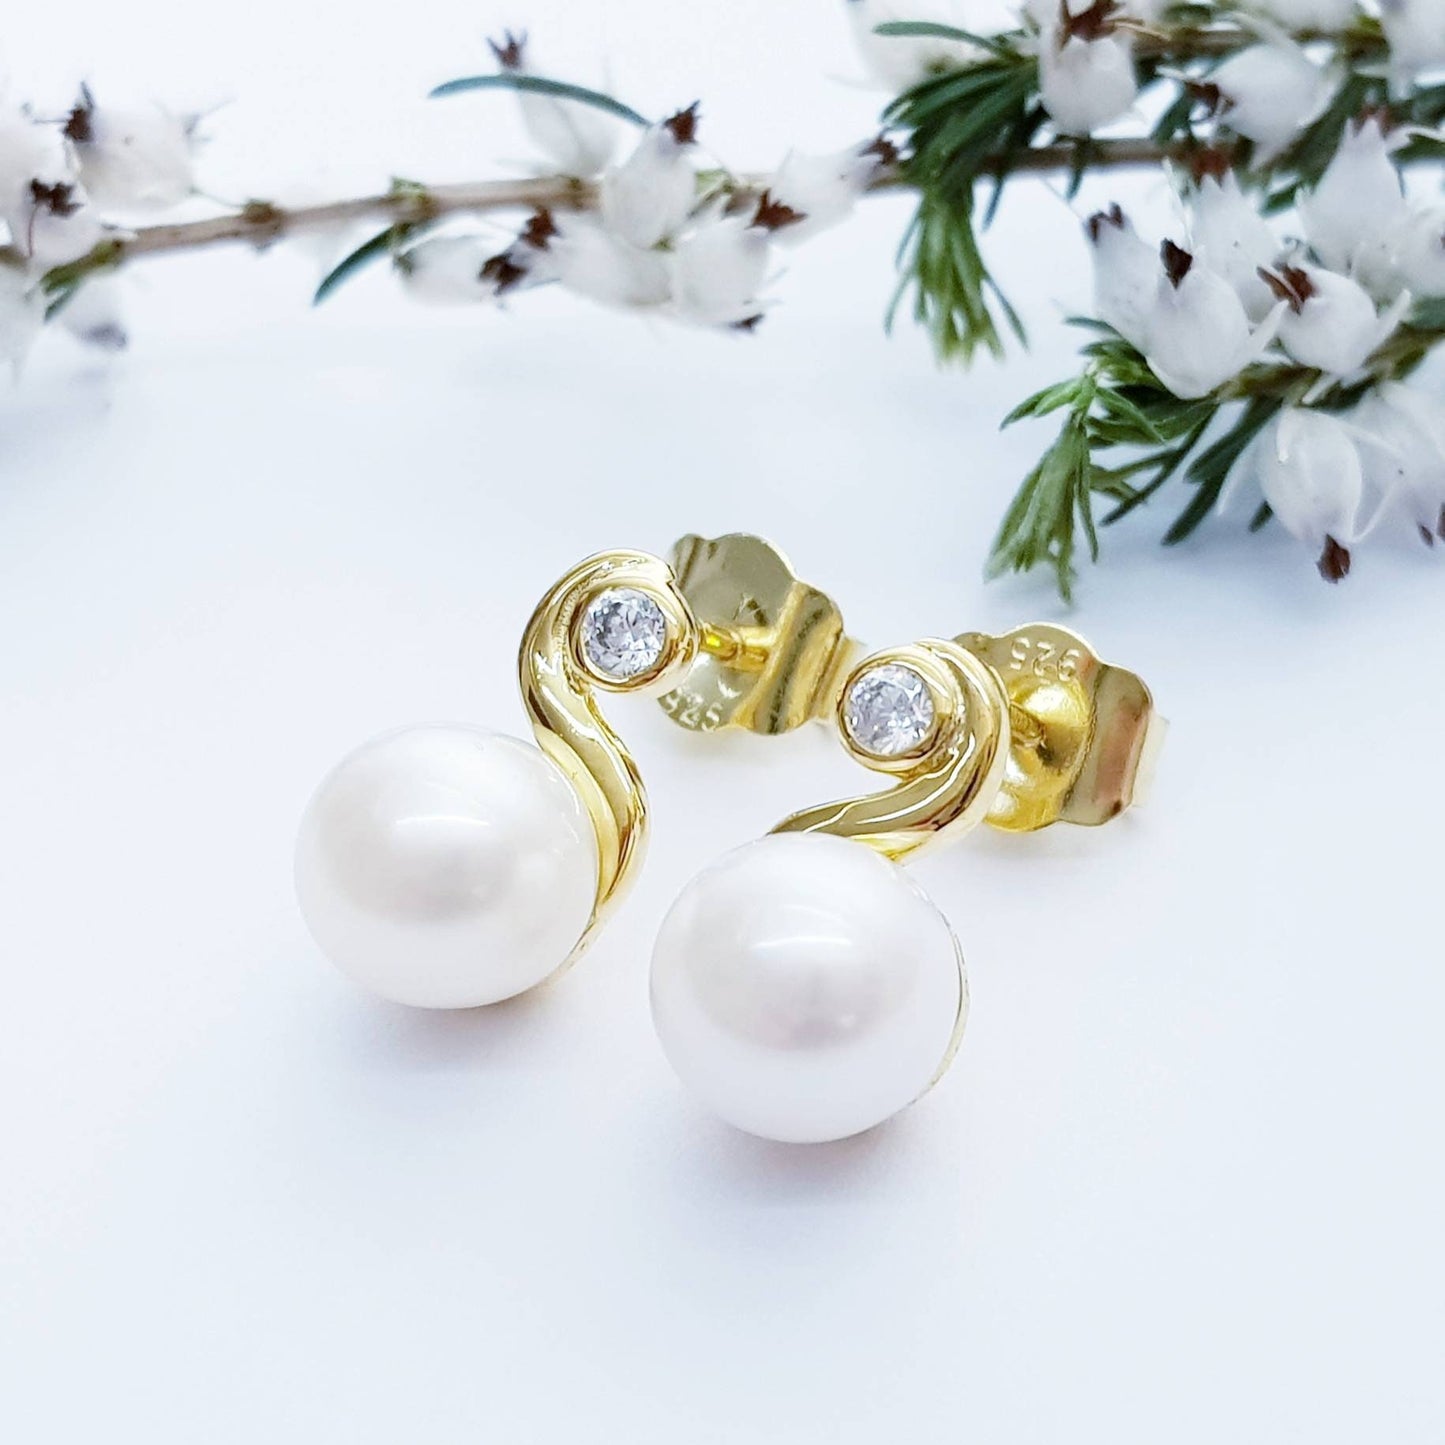 Gold plated sterling silver stud earrings with freshwater pearl